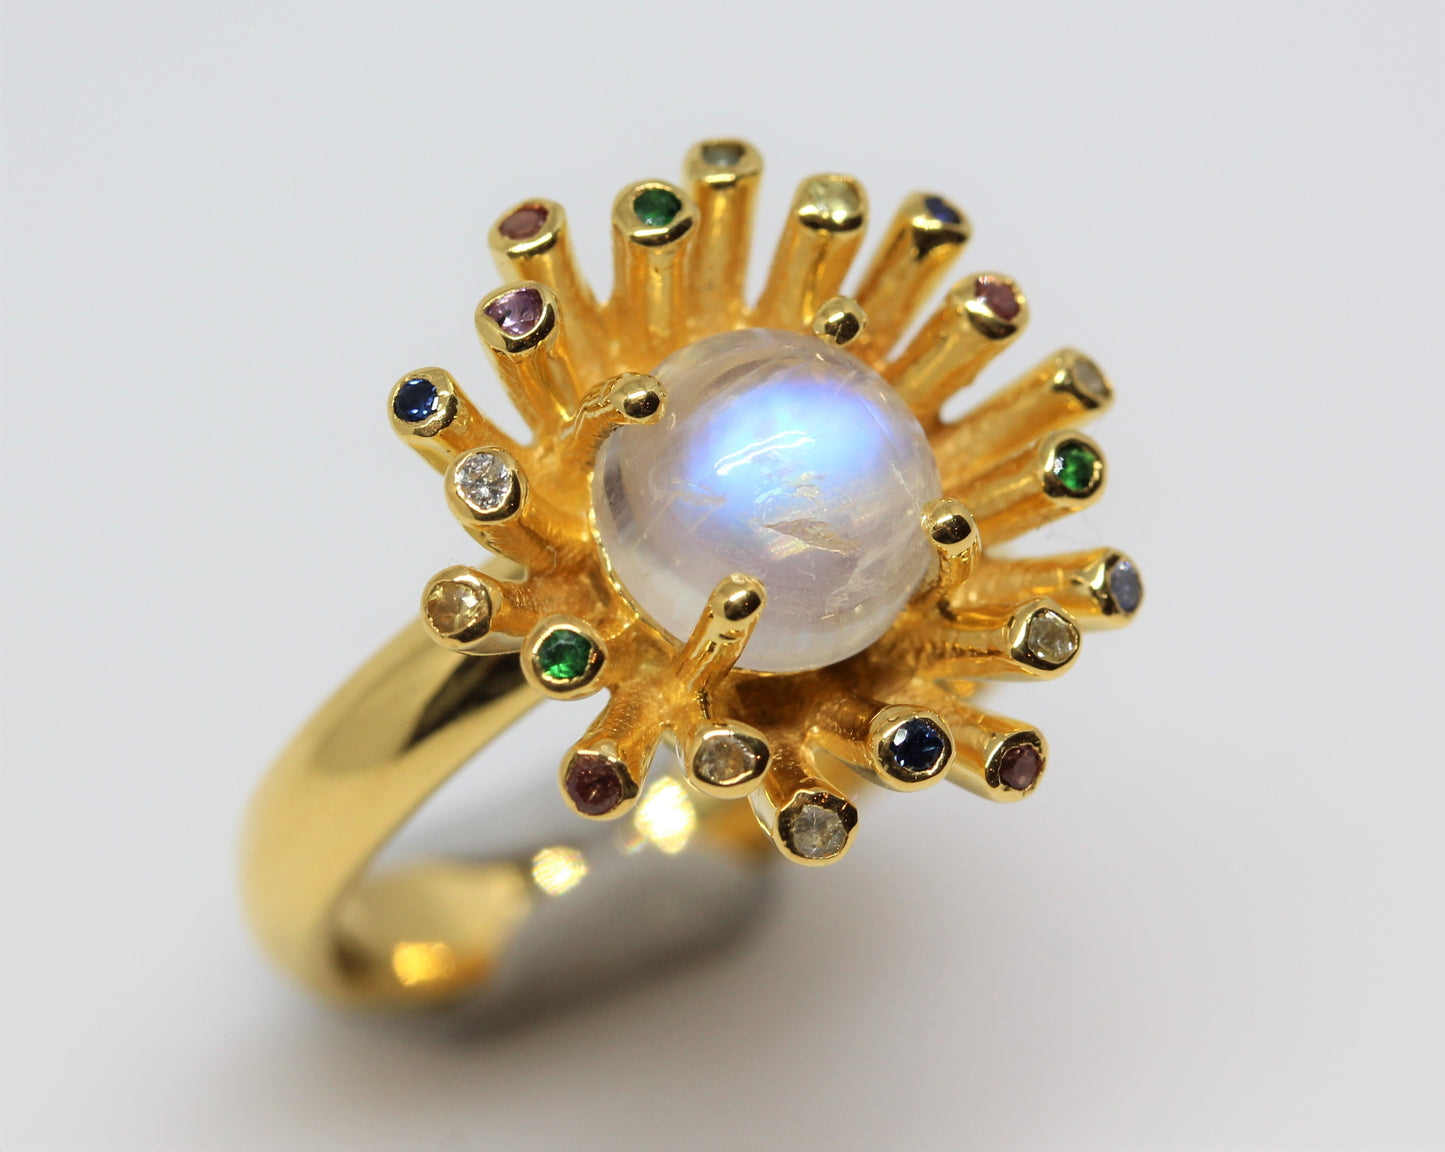 Moonstone Ring - 24k Gold Plated - Adjustable Size #277